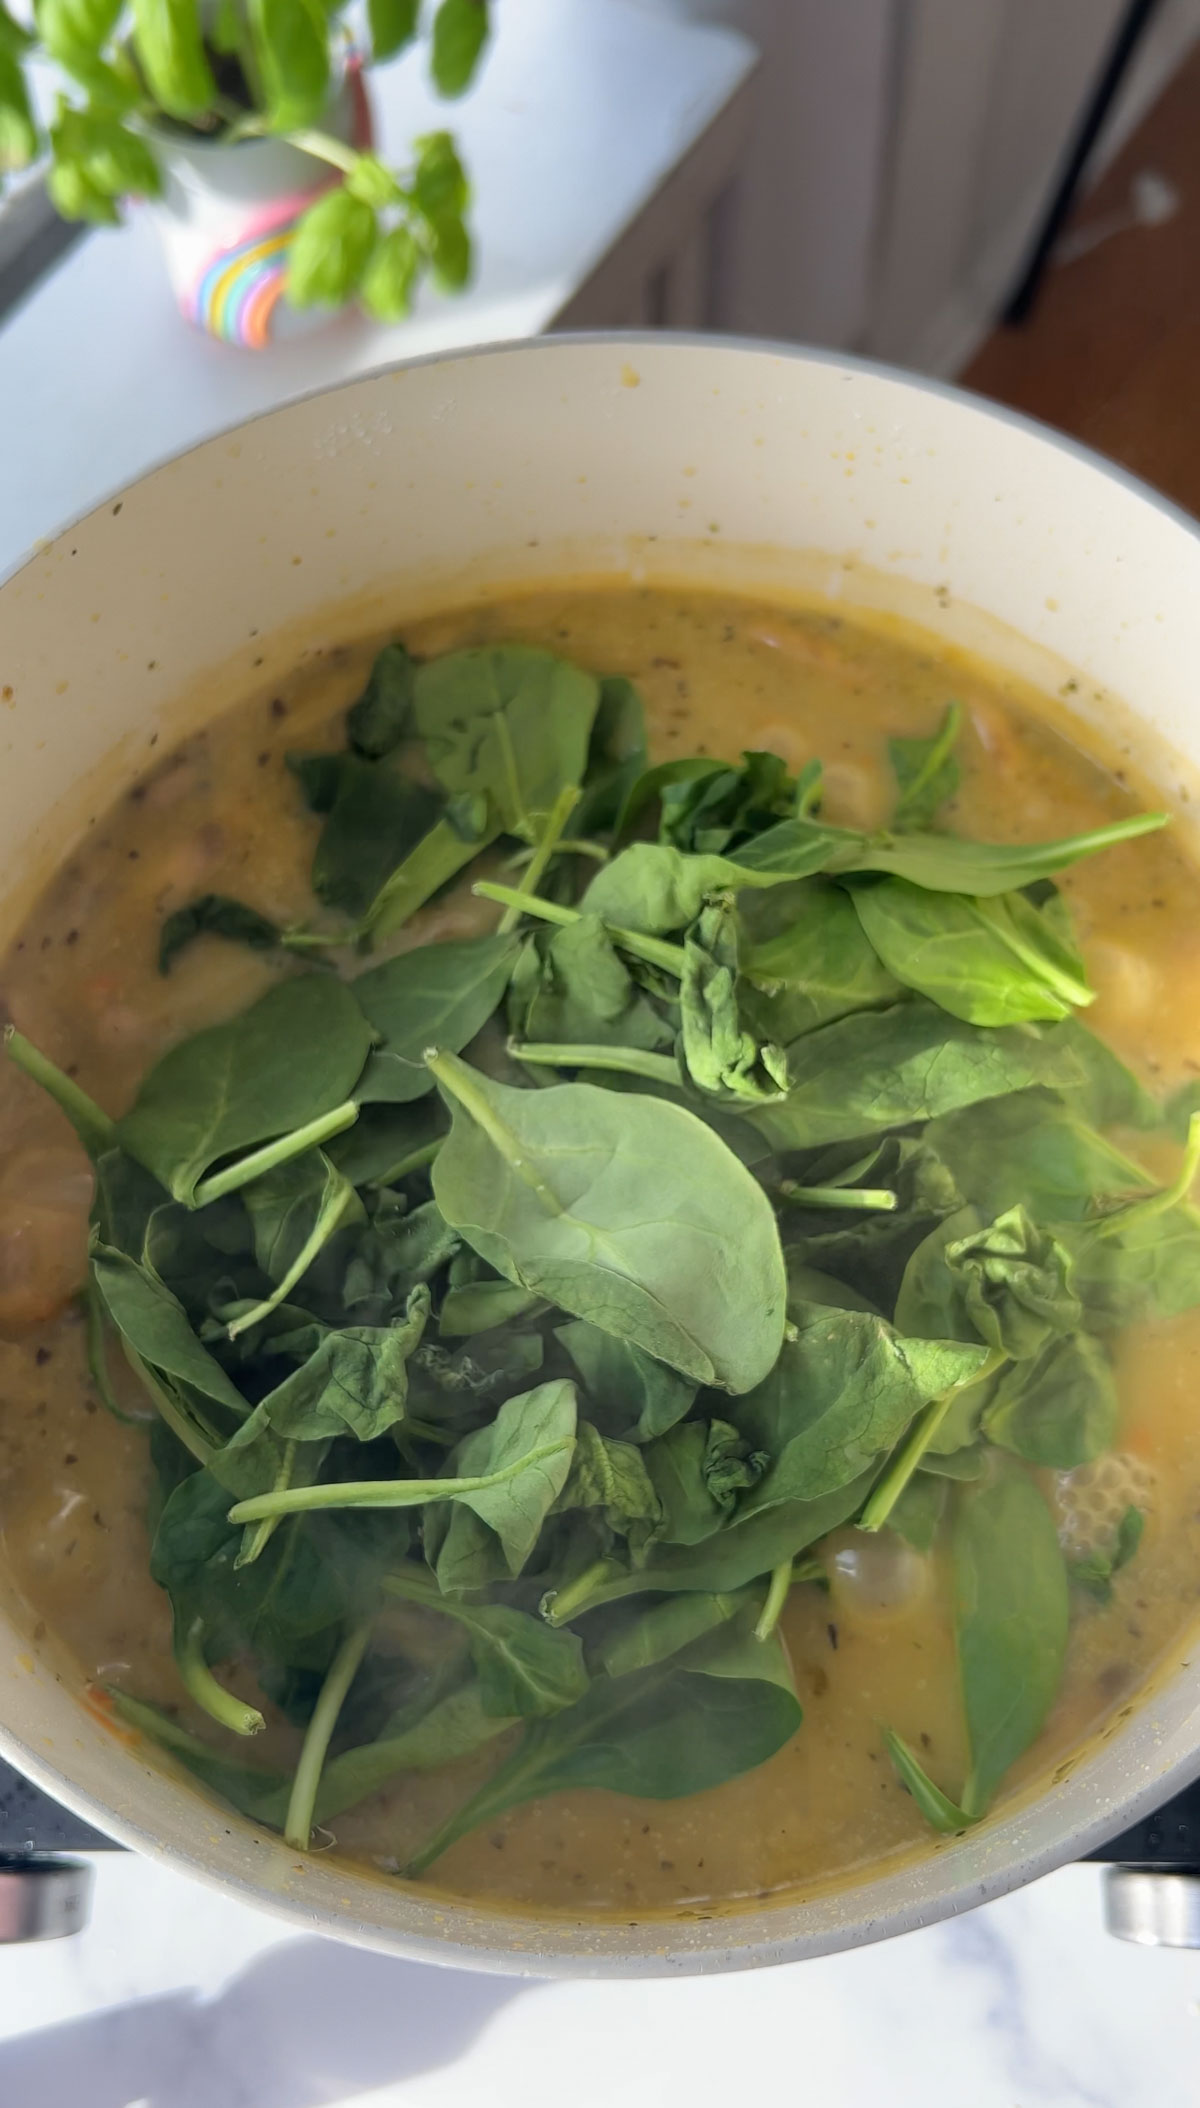 Spinach added to the cooking soup.